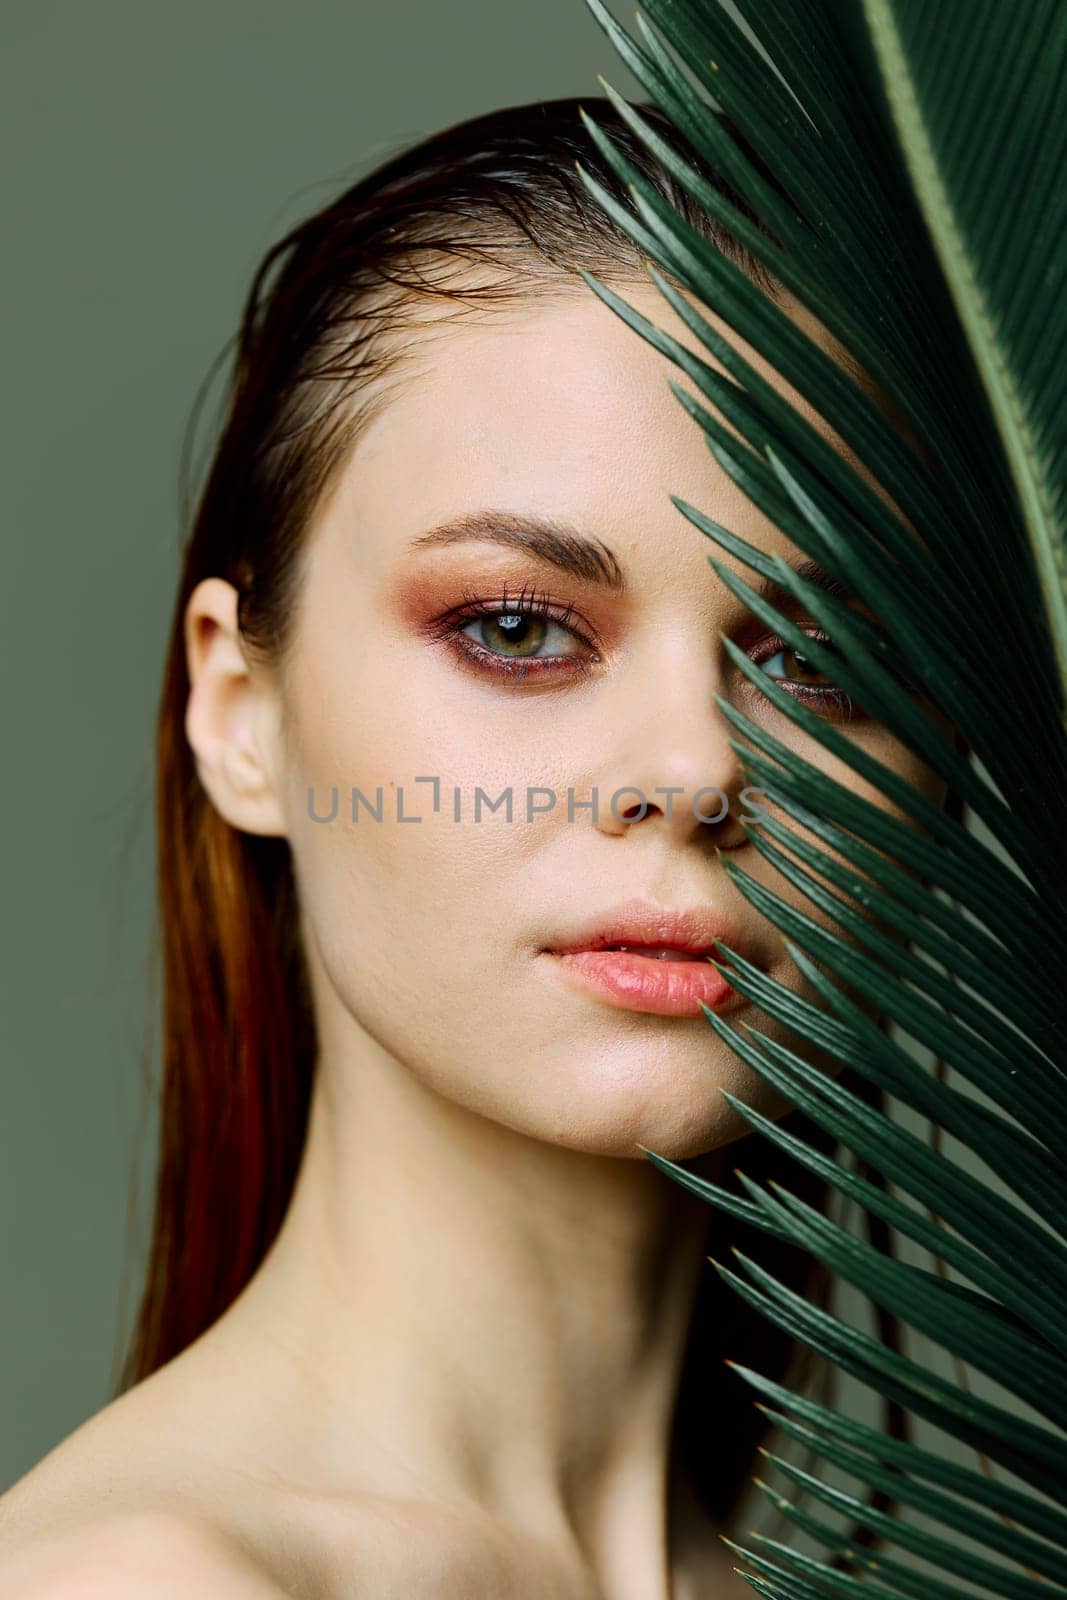 a close beauty portrait of a beautiful woman standing holding a tropical palm leaf in her hand, bringing it to her face, looking into the camera. Vertical photo without retouching of problem skin. High quality photo